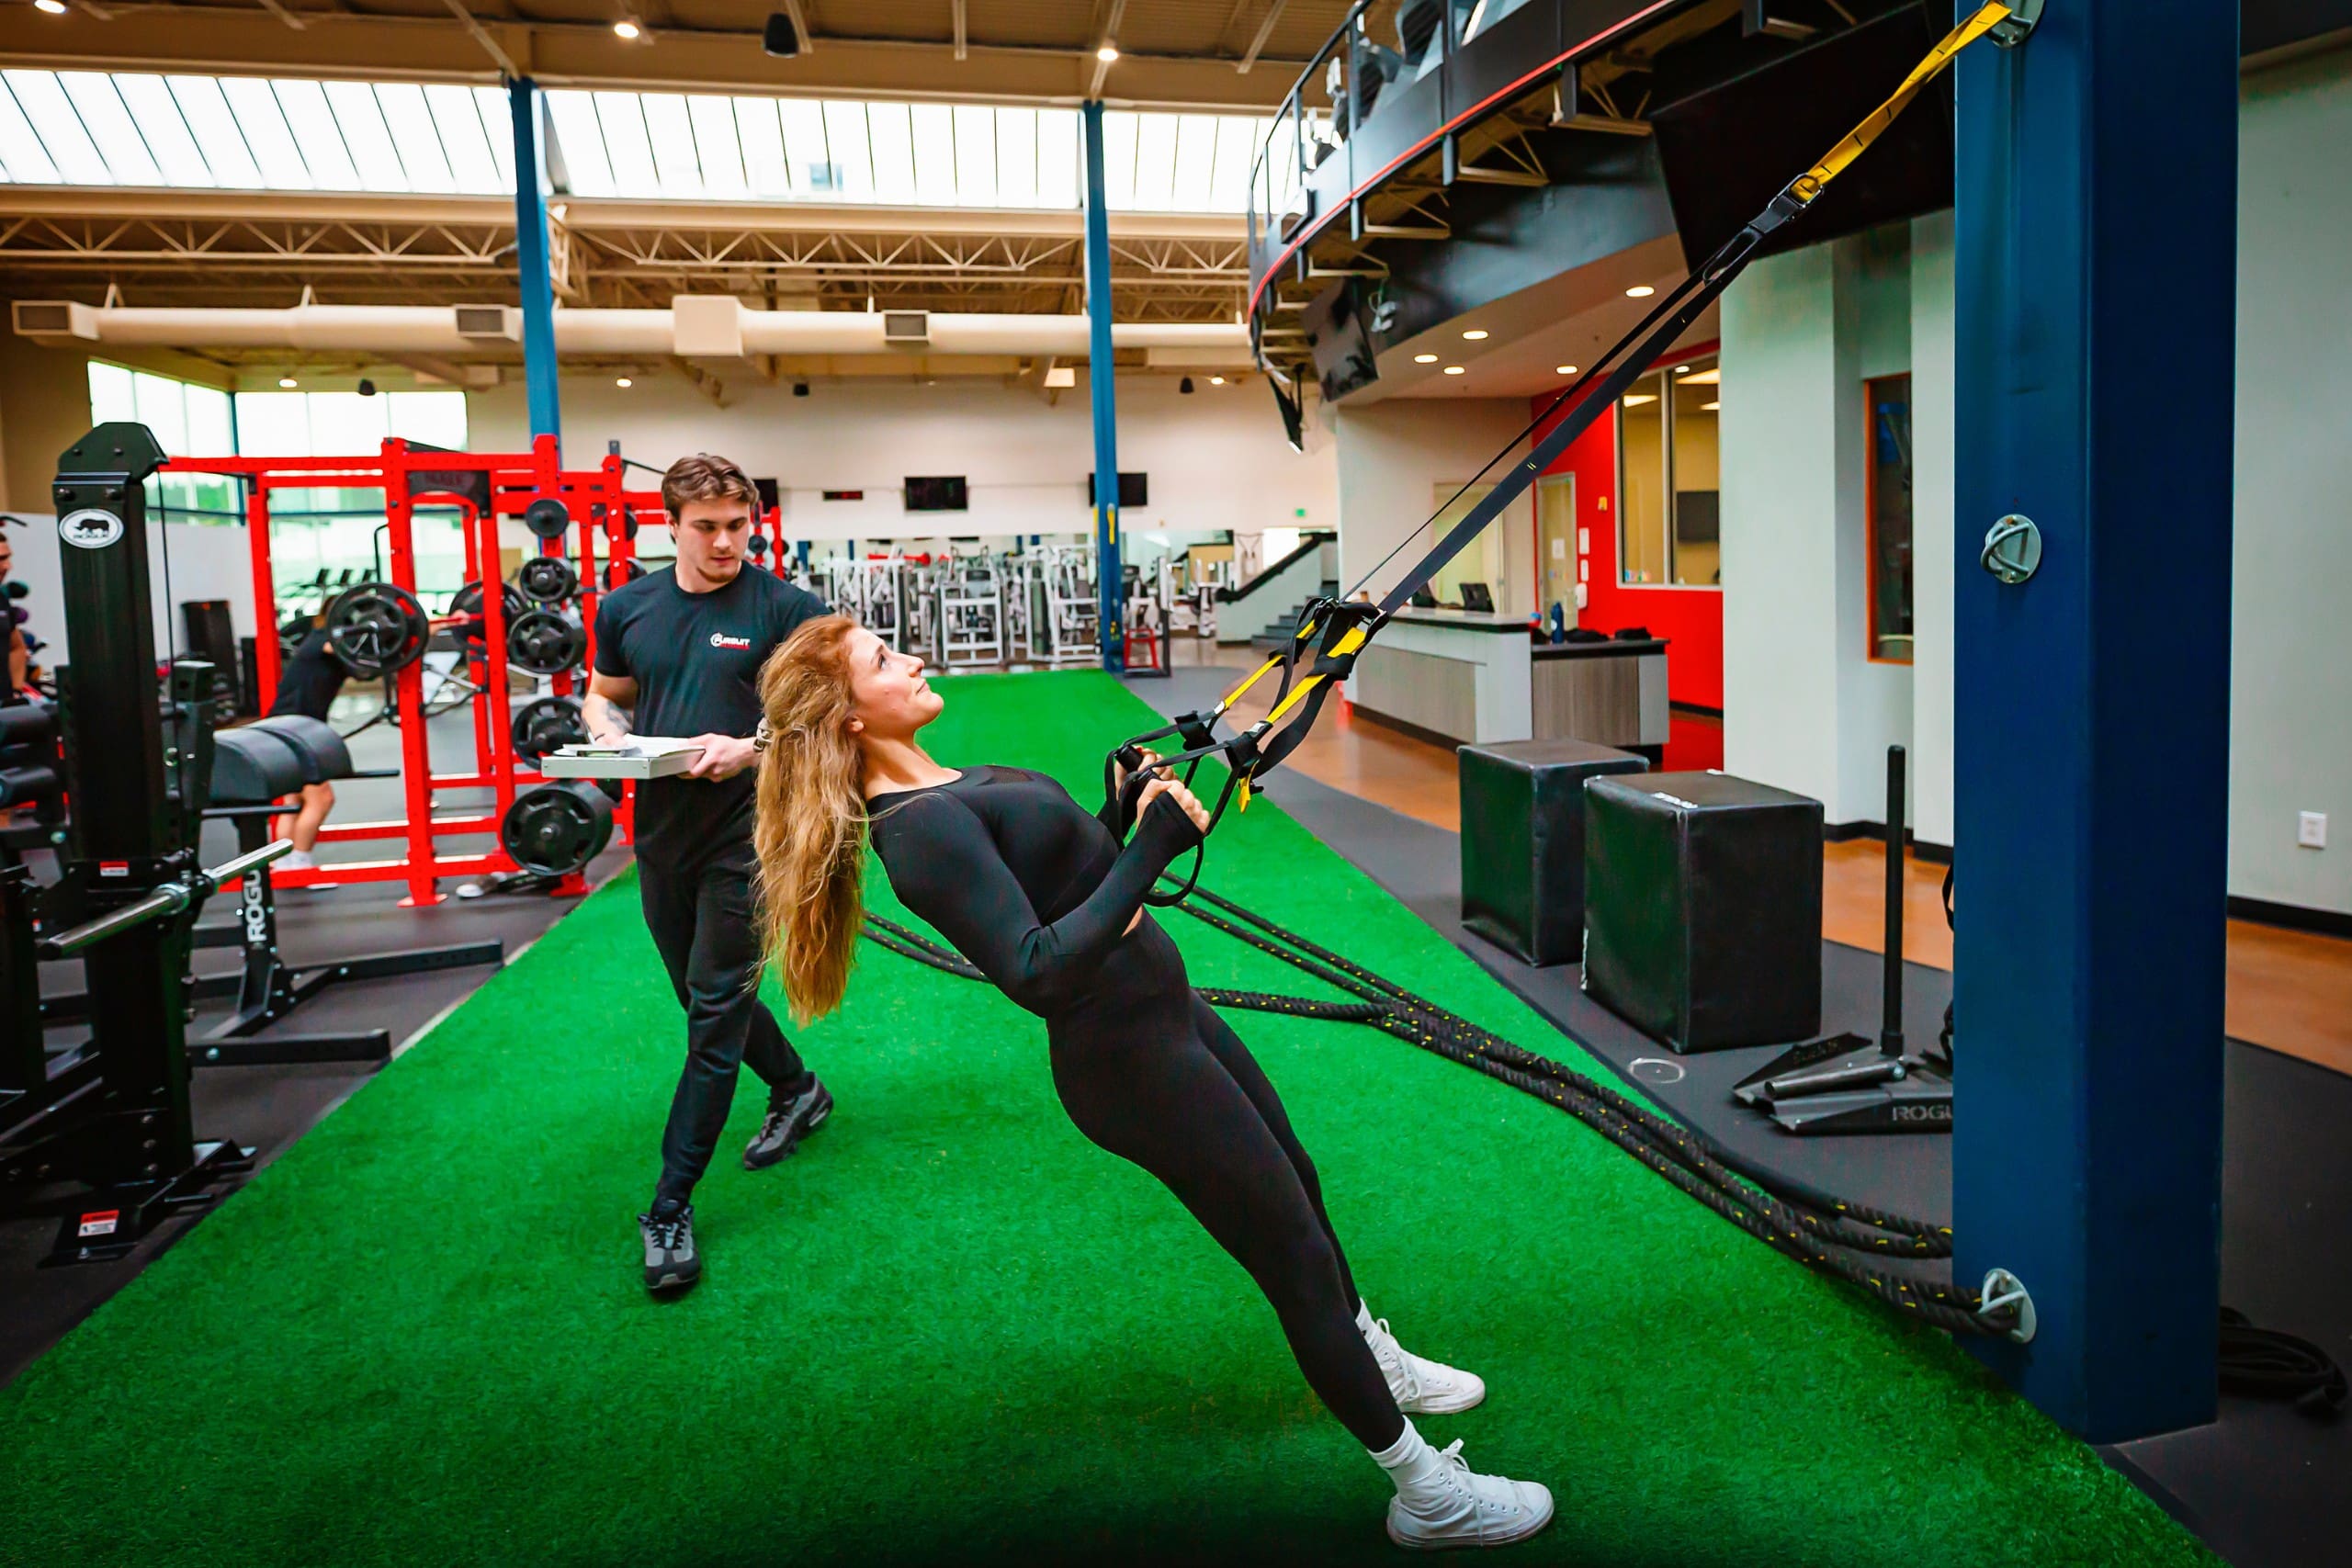 pursuit fitness gym functional training area with inbody analysis